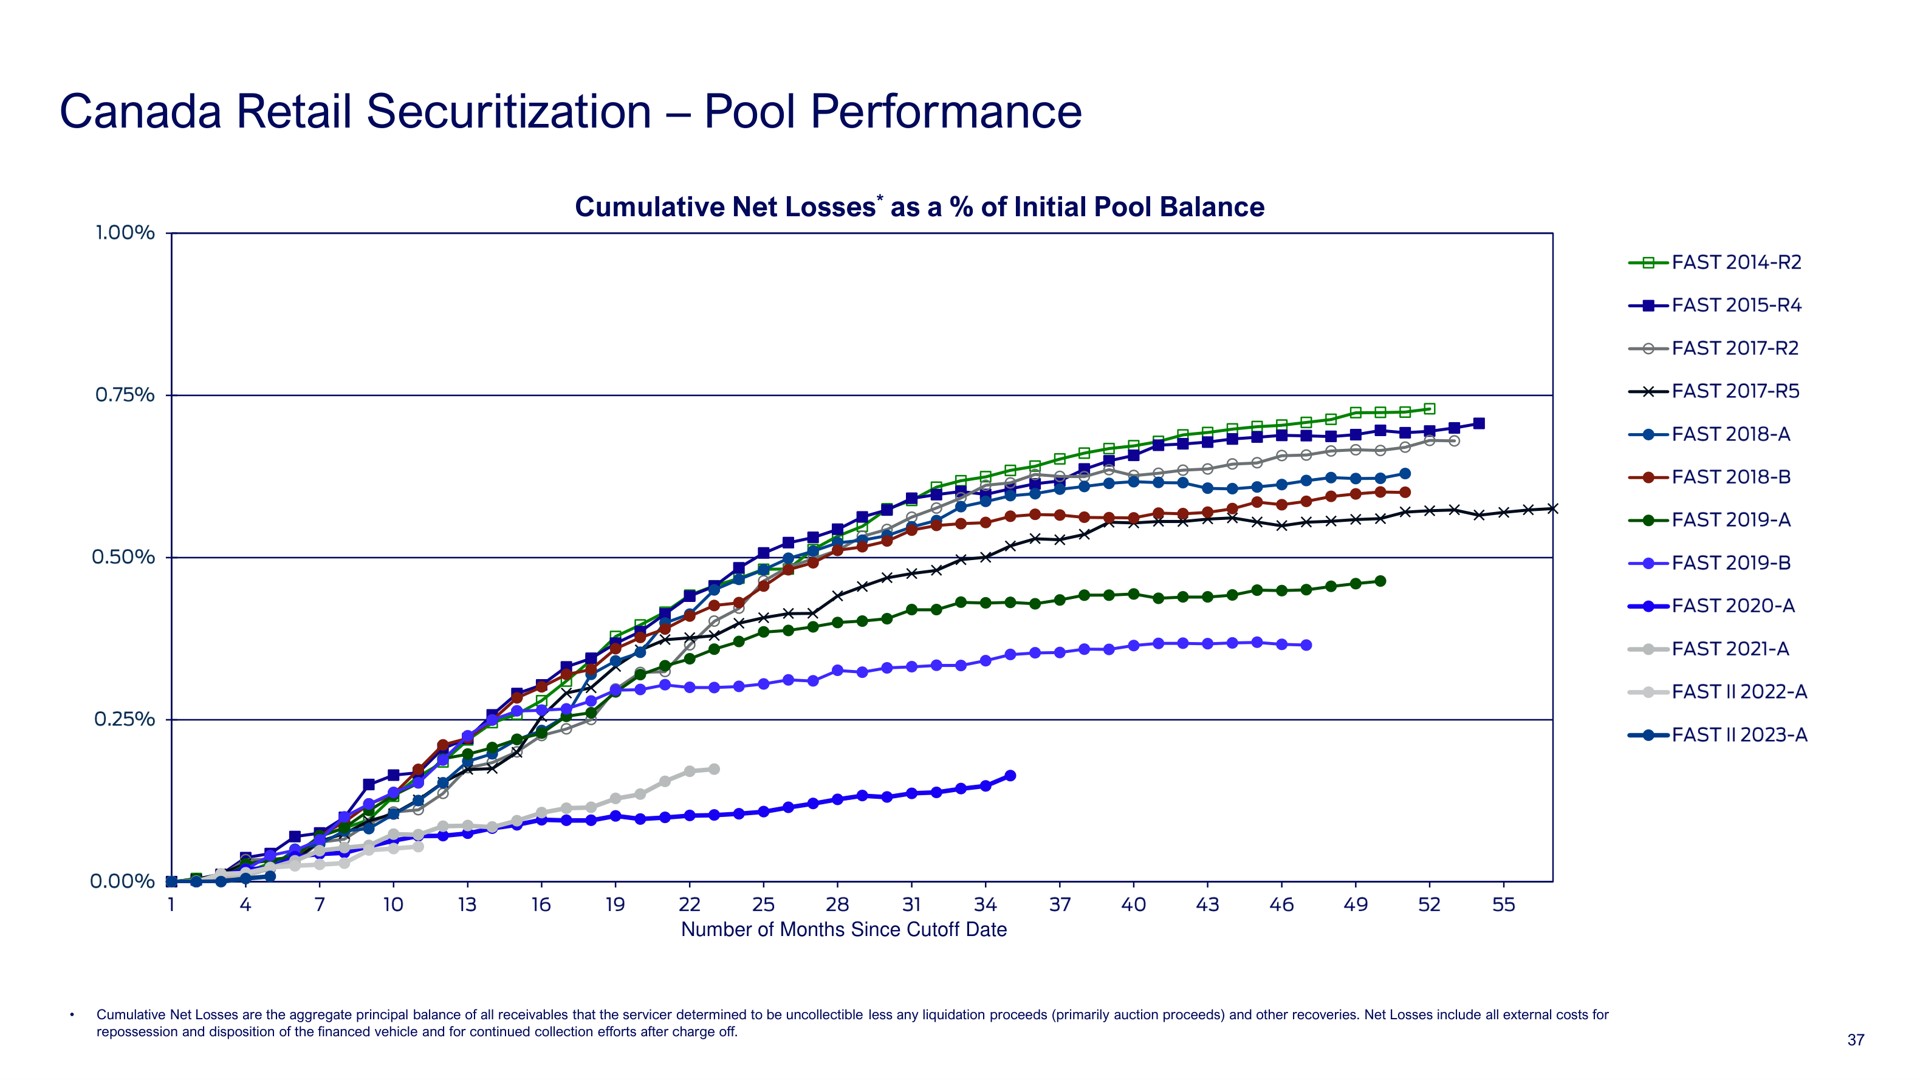 canada retail pool performance | Ford